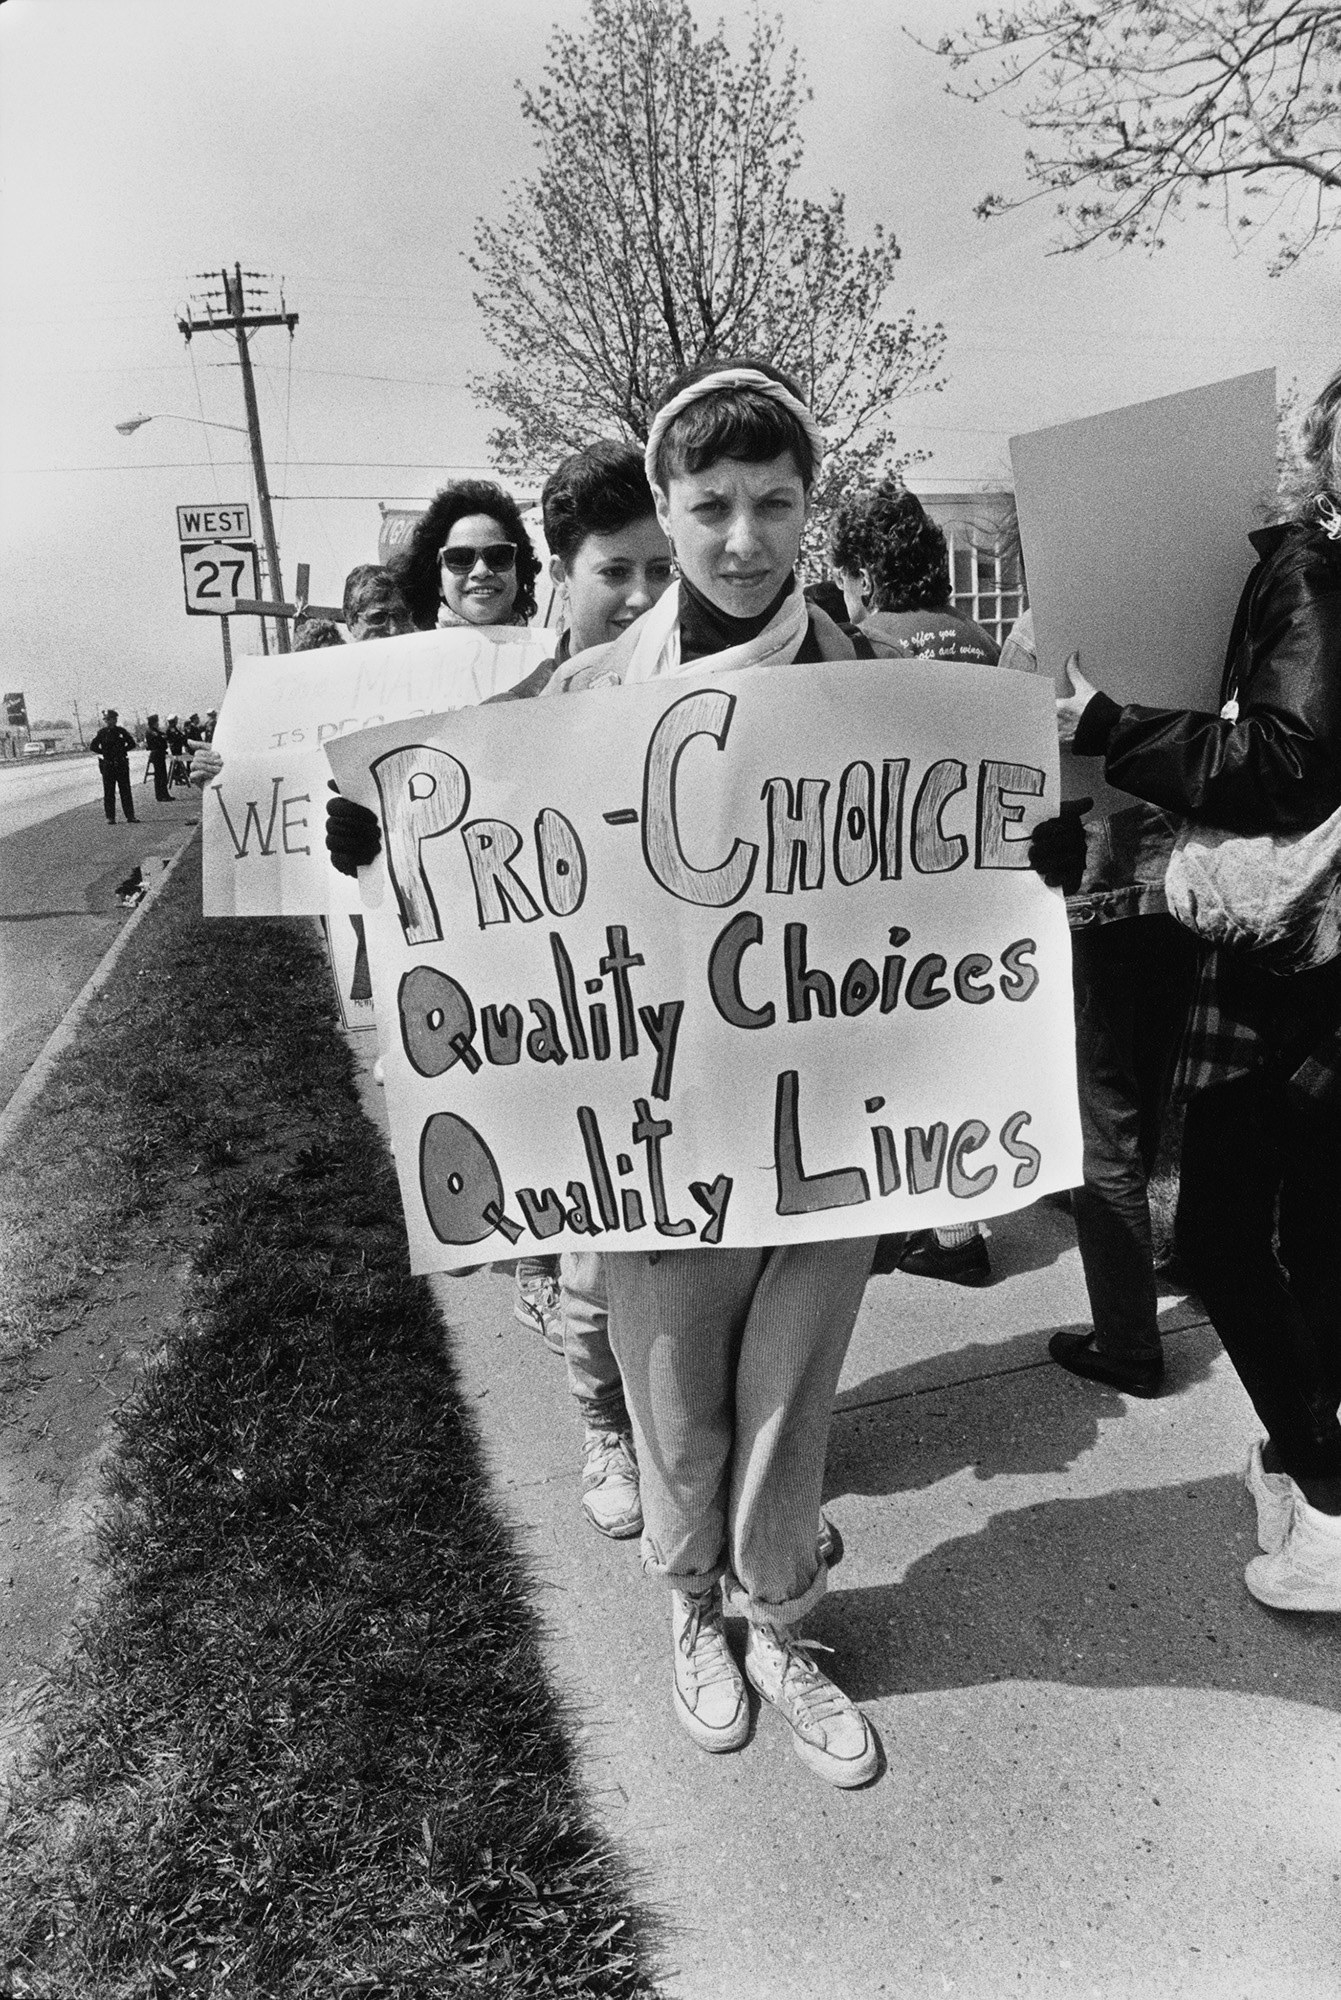 A demonstrator&#x27;s sign reads &quot;pro-choice, quality choices, quality lives&quot;